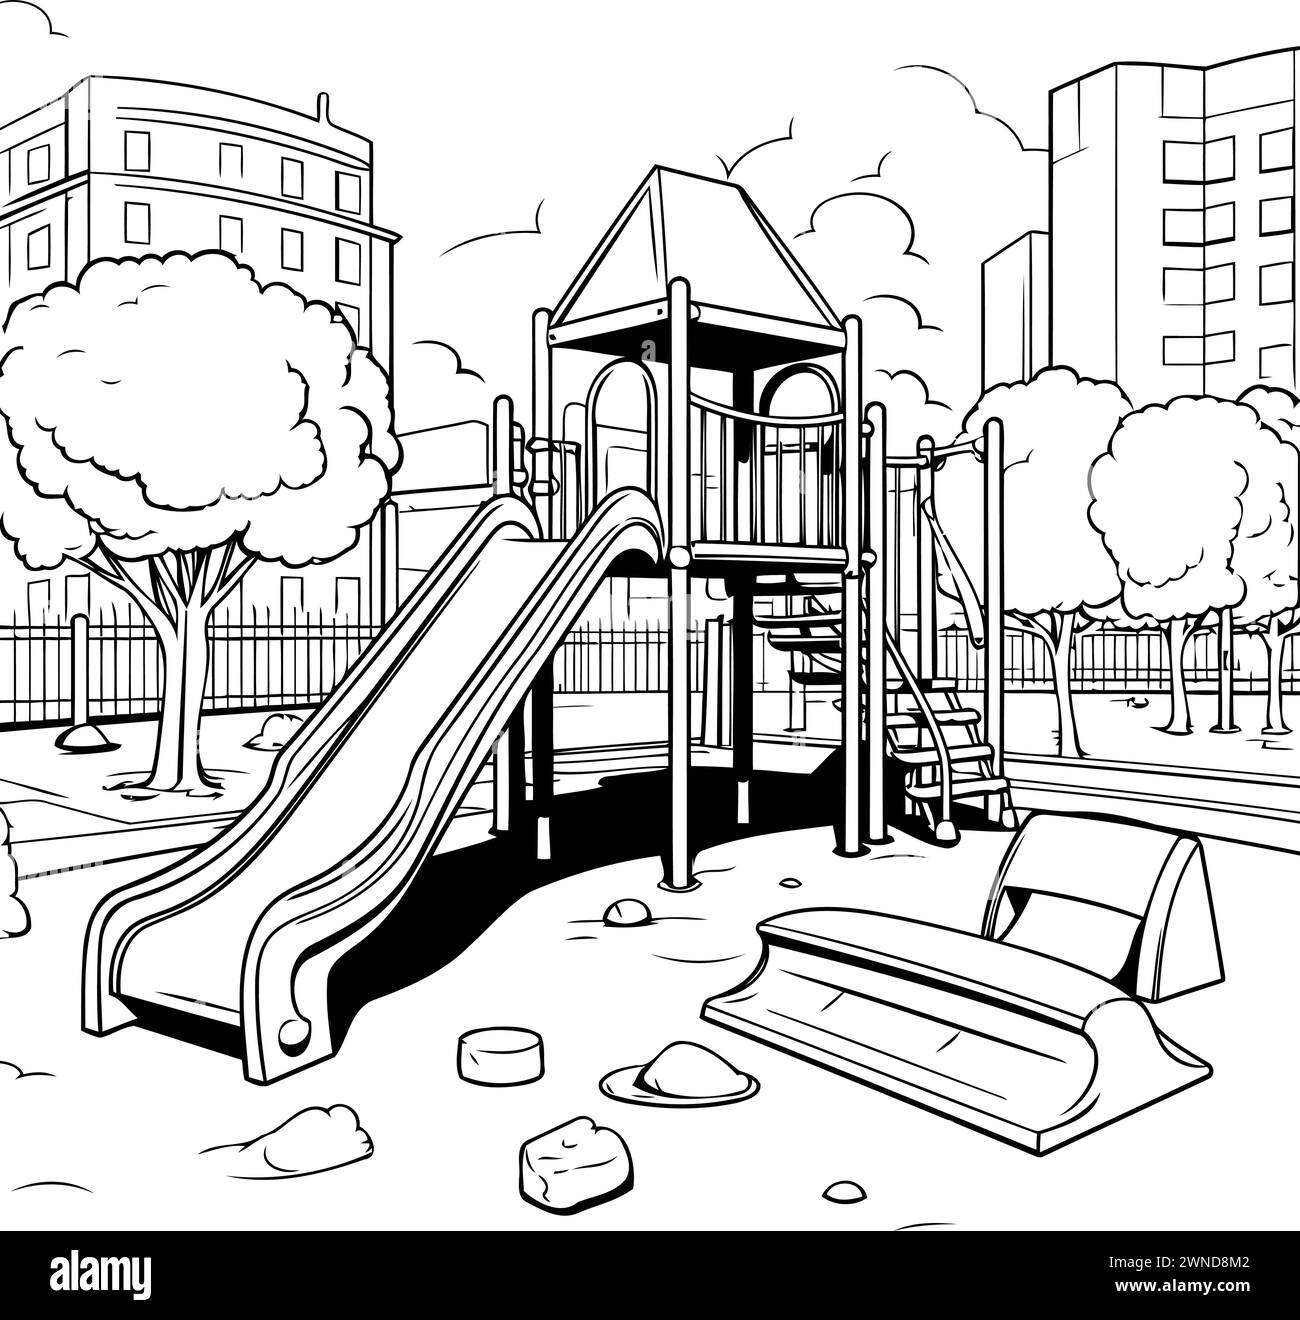 Free: Children playing slide in the park Free Vector - nohat.cc